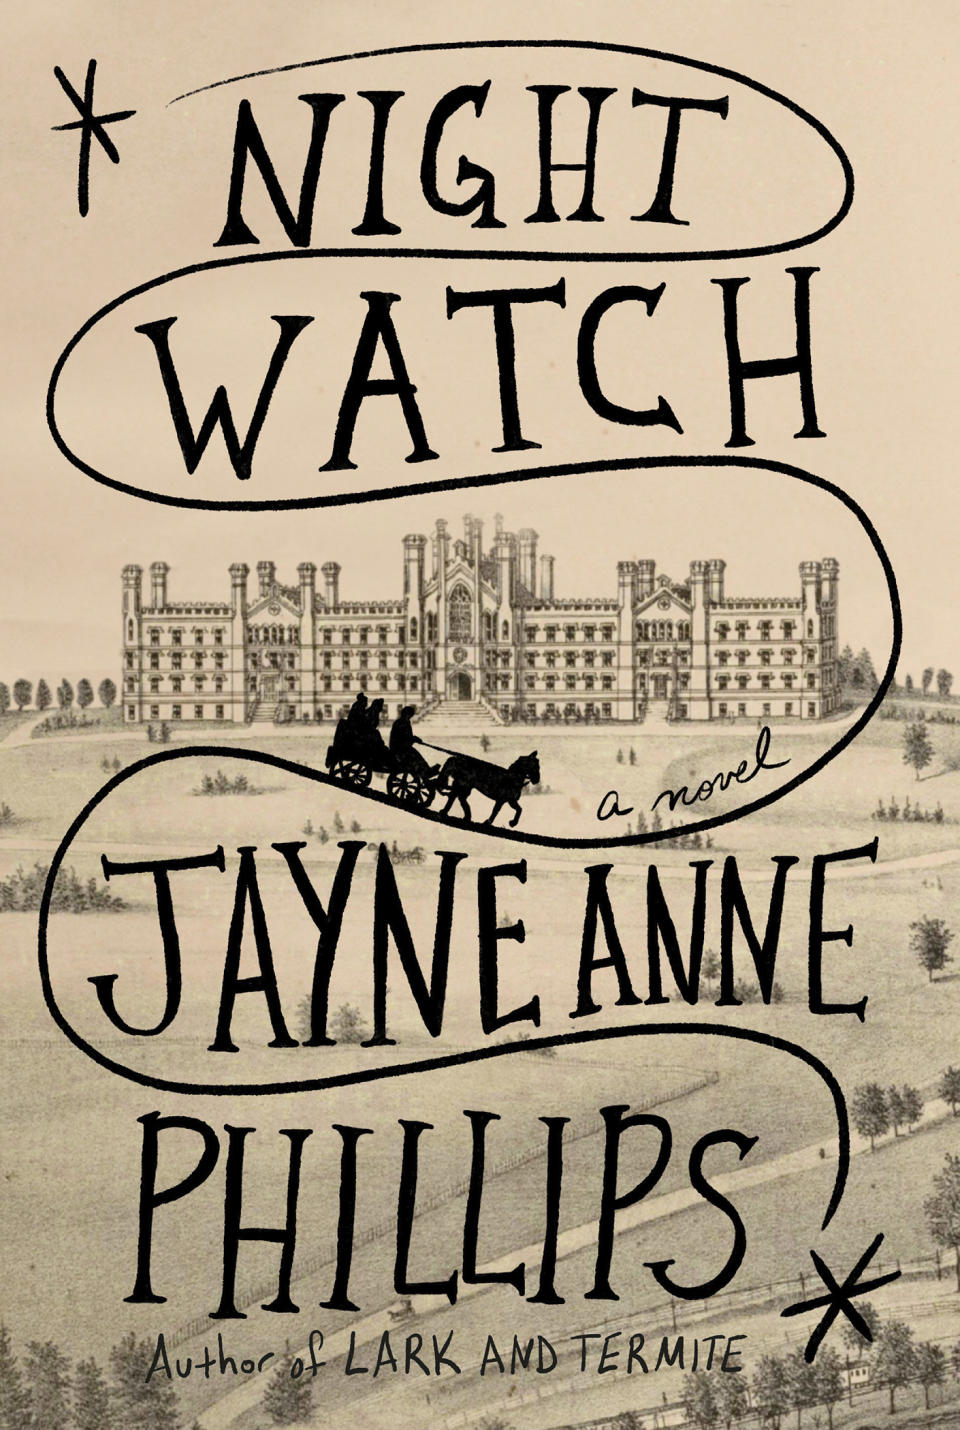 This cover image released by Knopf shows "Night Watch" by Jayne Anne Phillips, winner of the Pulitzer Prize for fiction. (Knopf via AP)